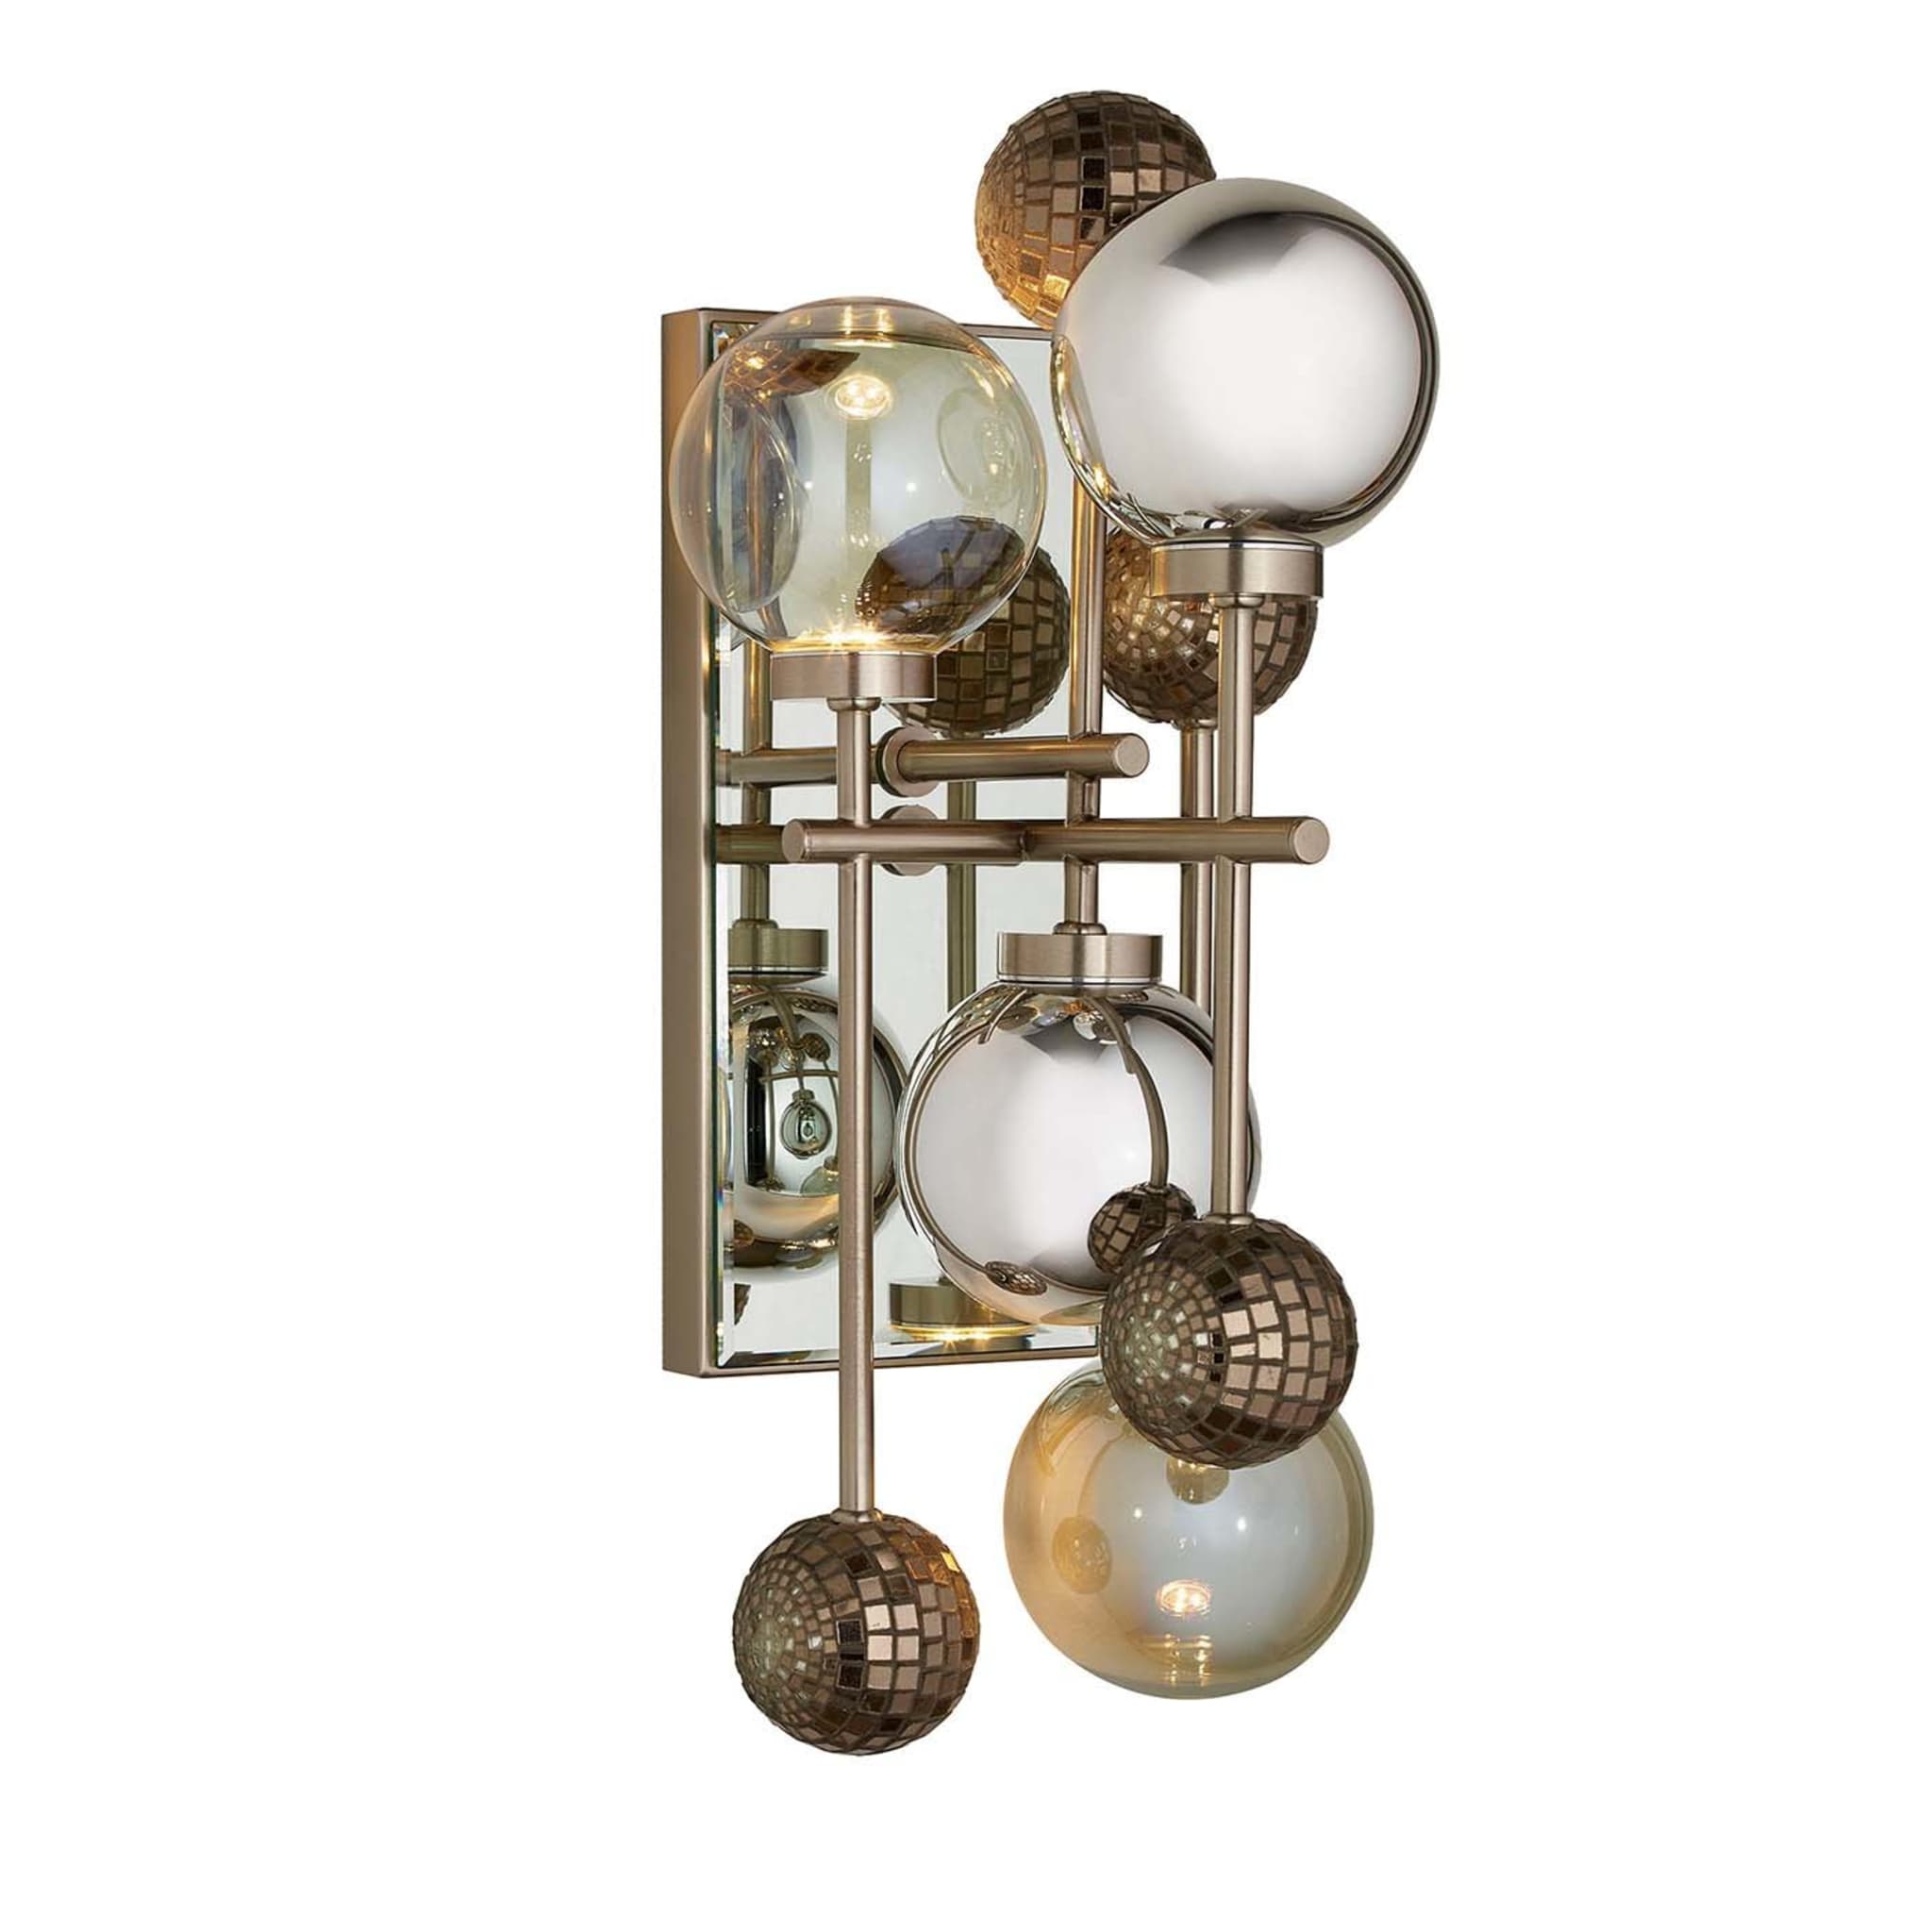 Fluxus wall sconce - Main view